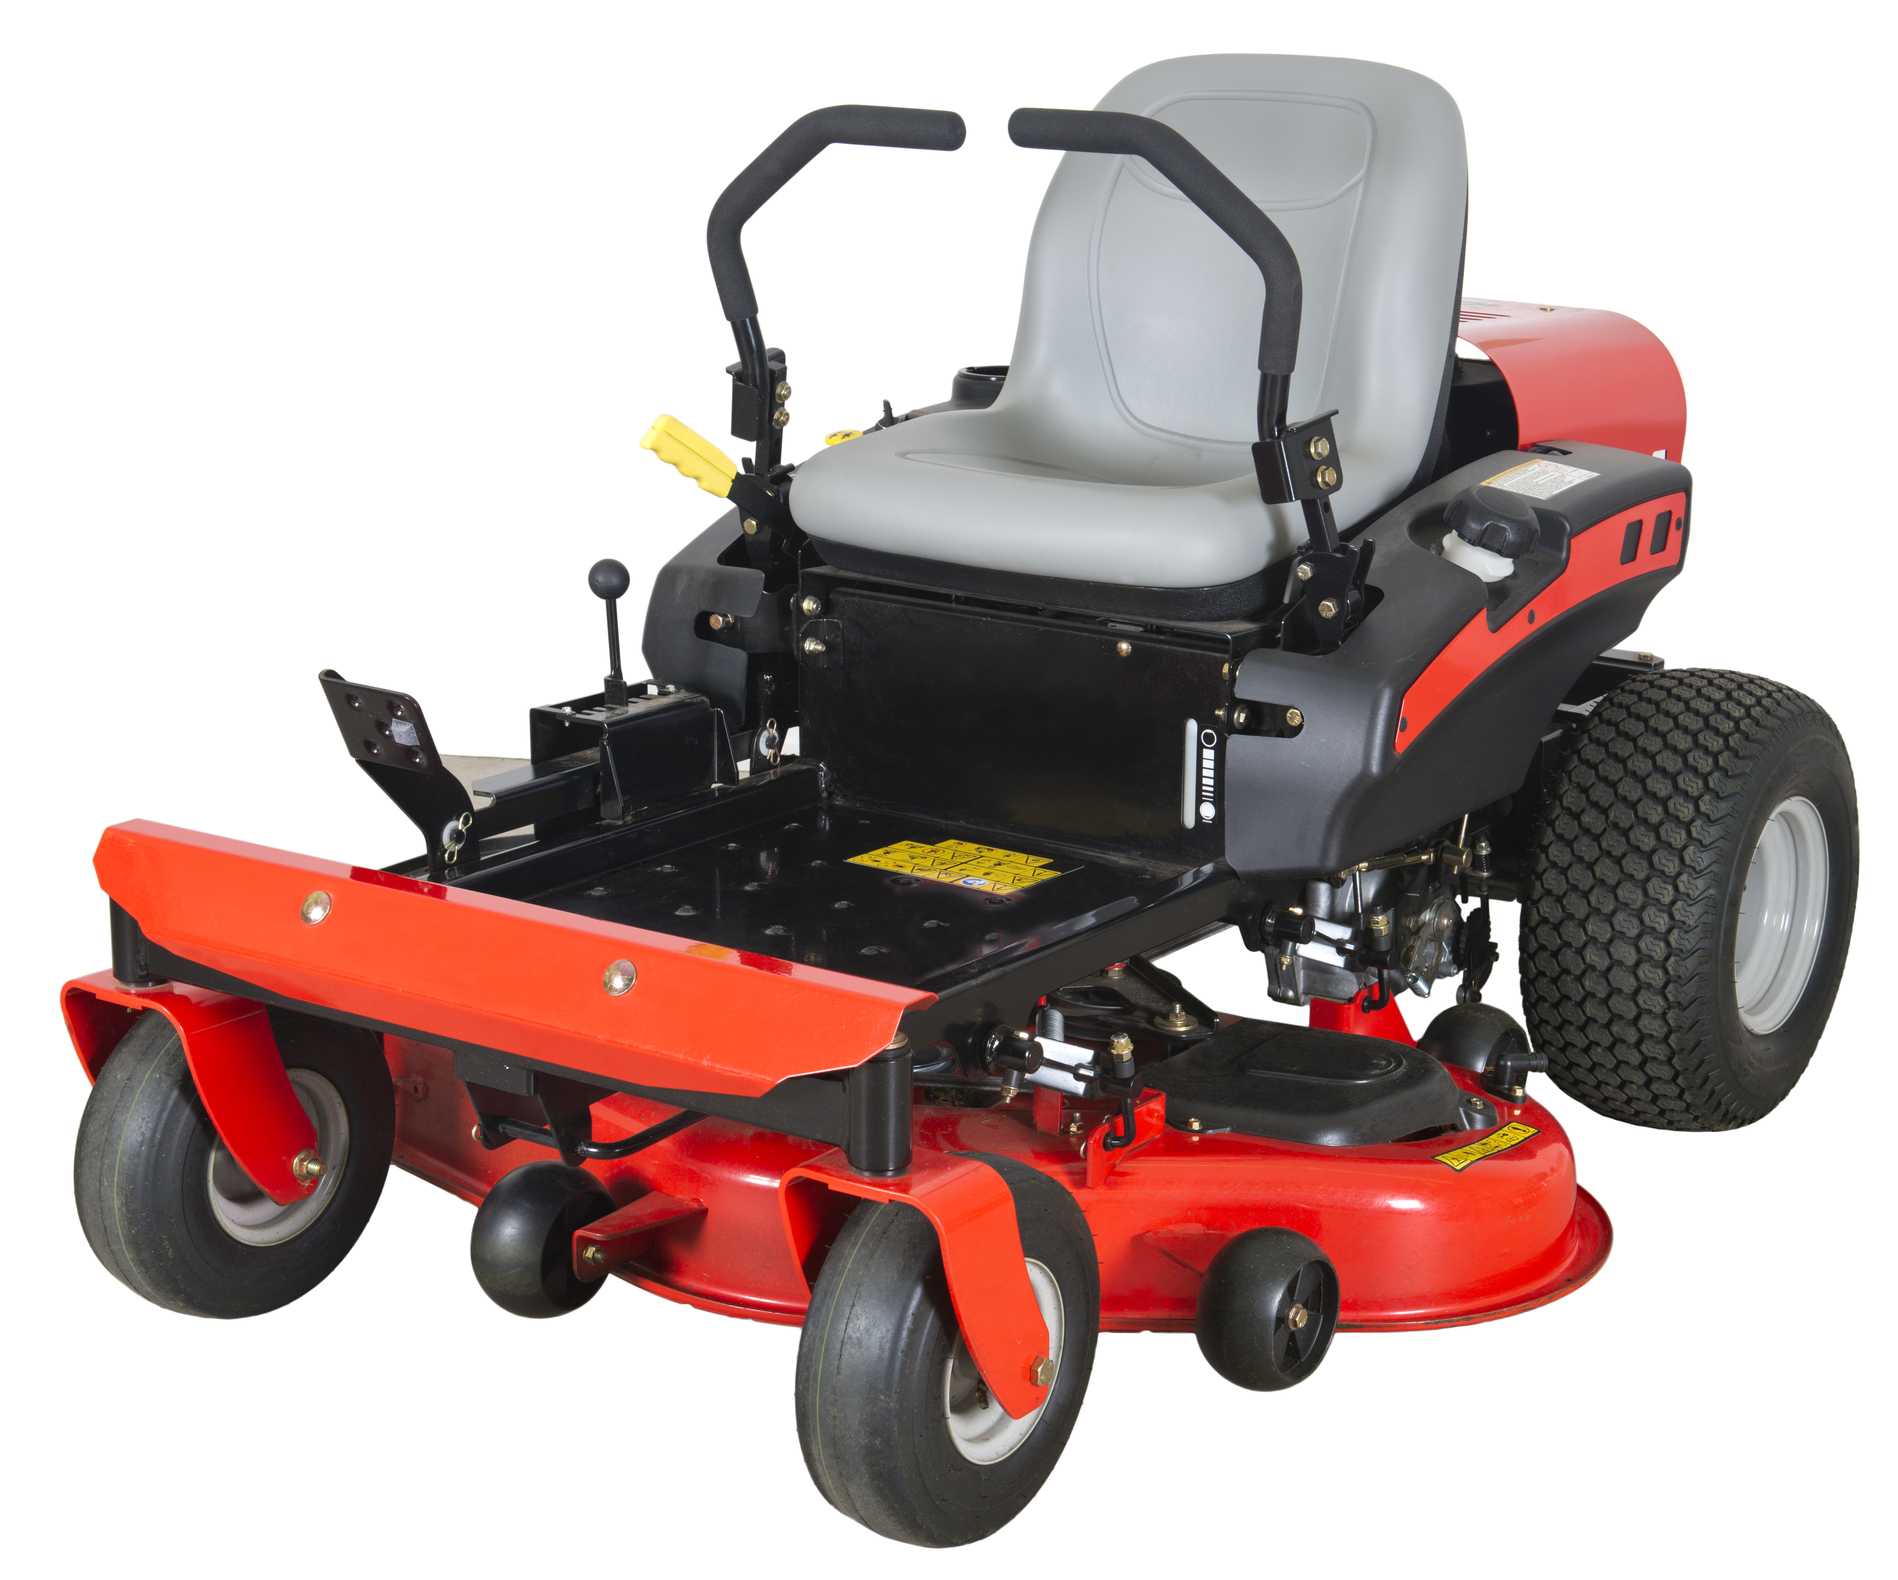 5 Best rated commercial zero-turn mowers (An Honest Review!)